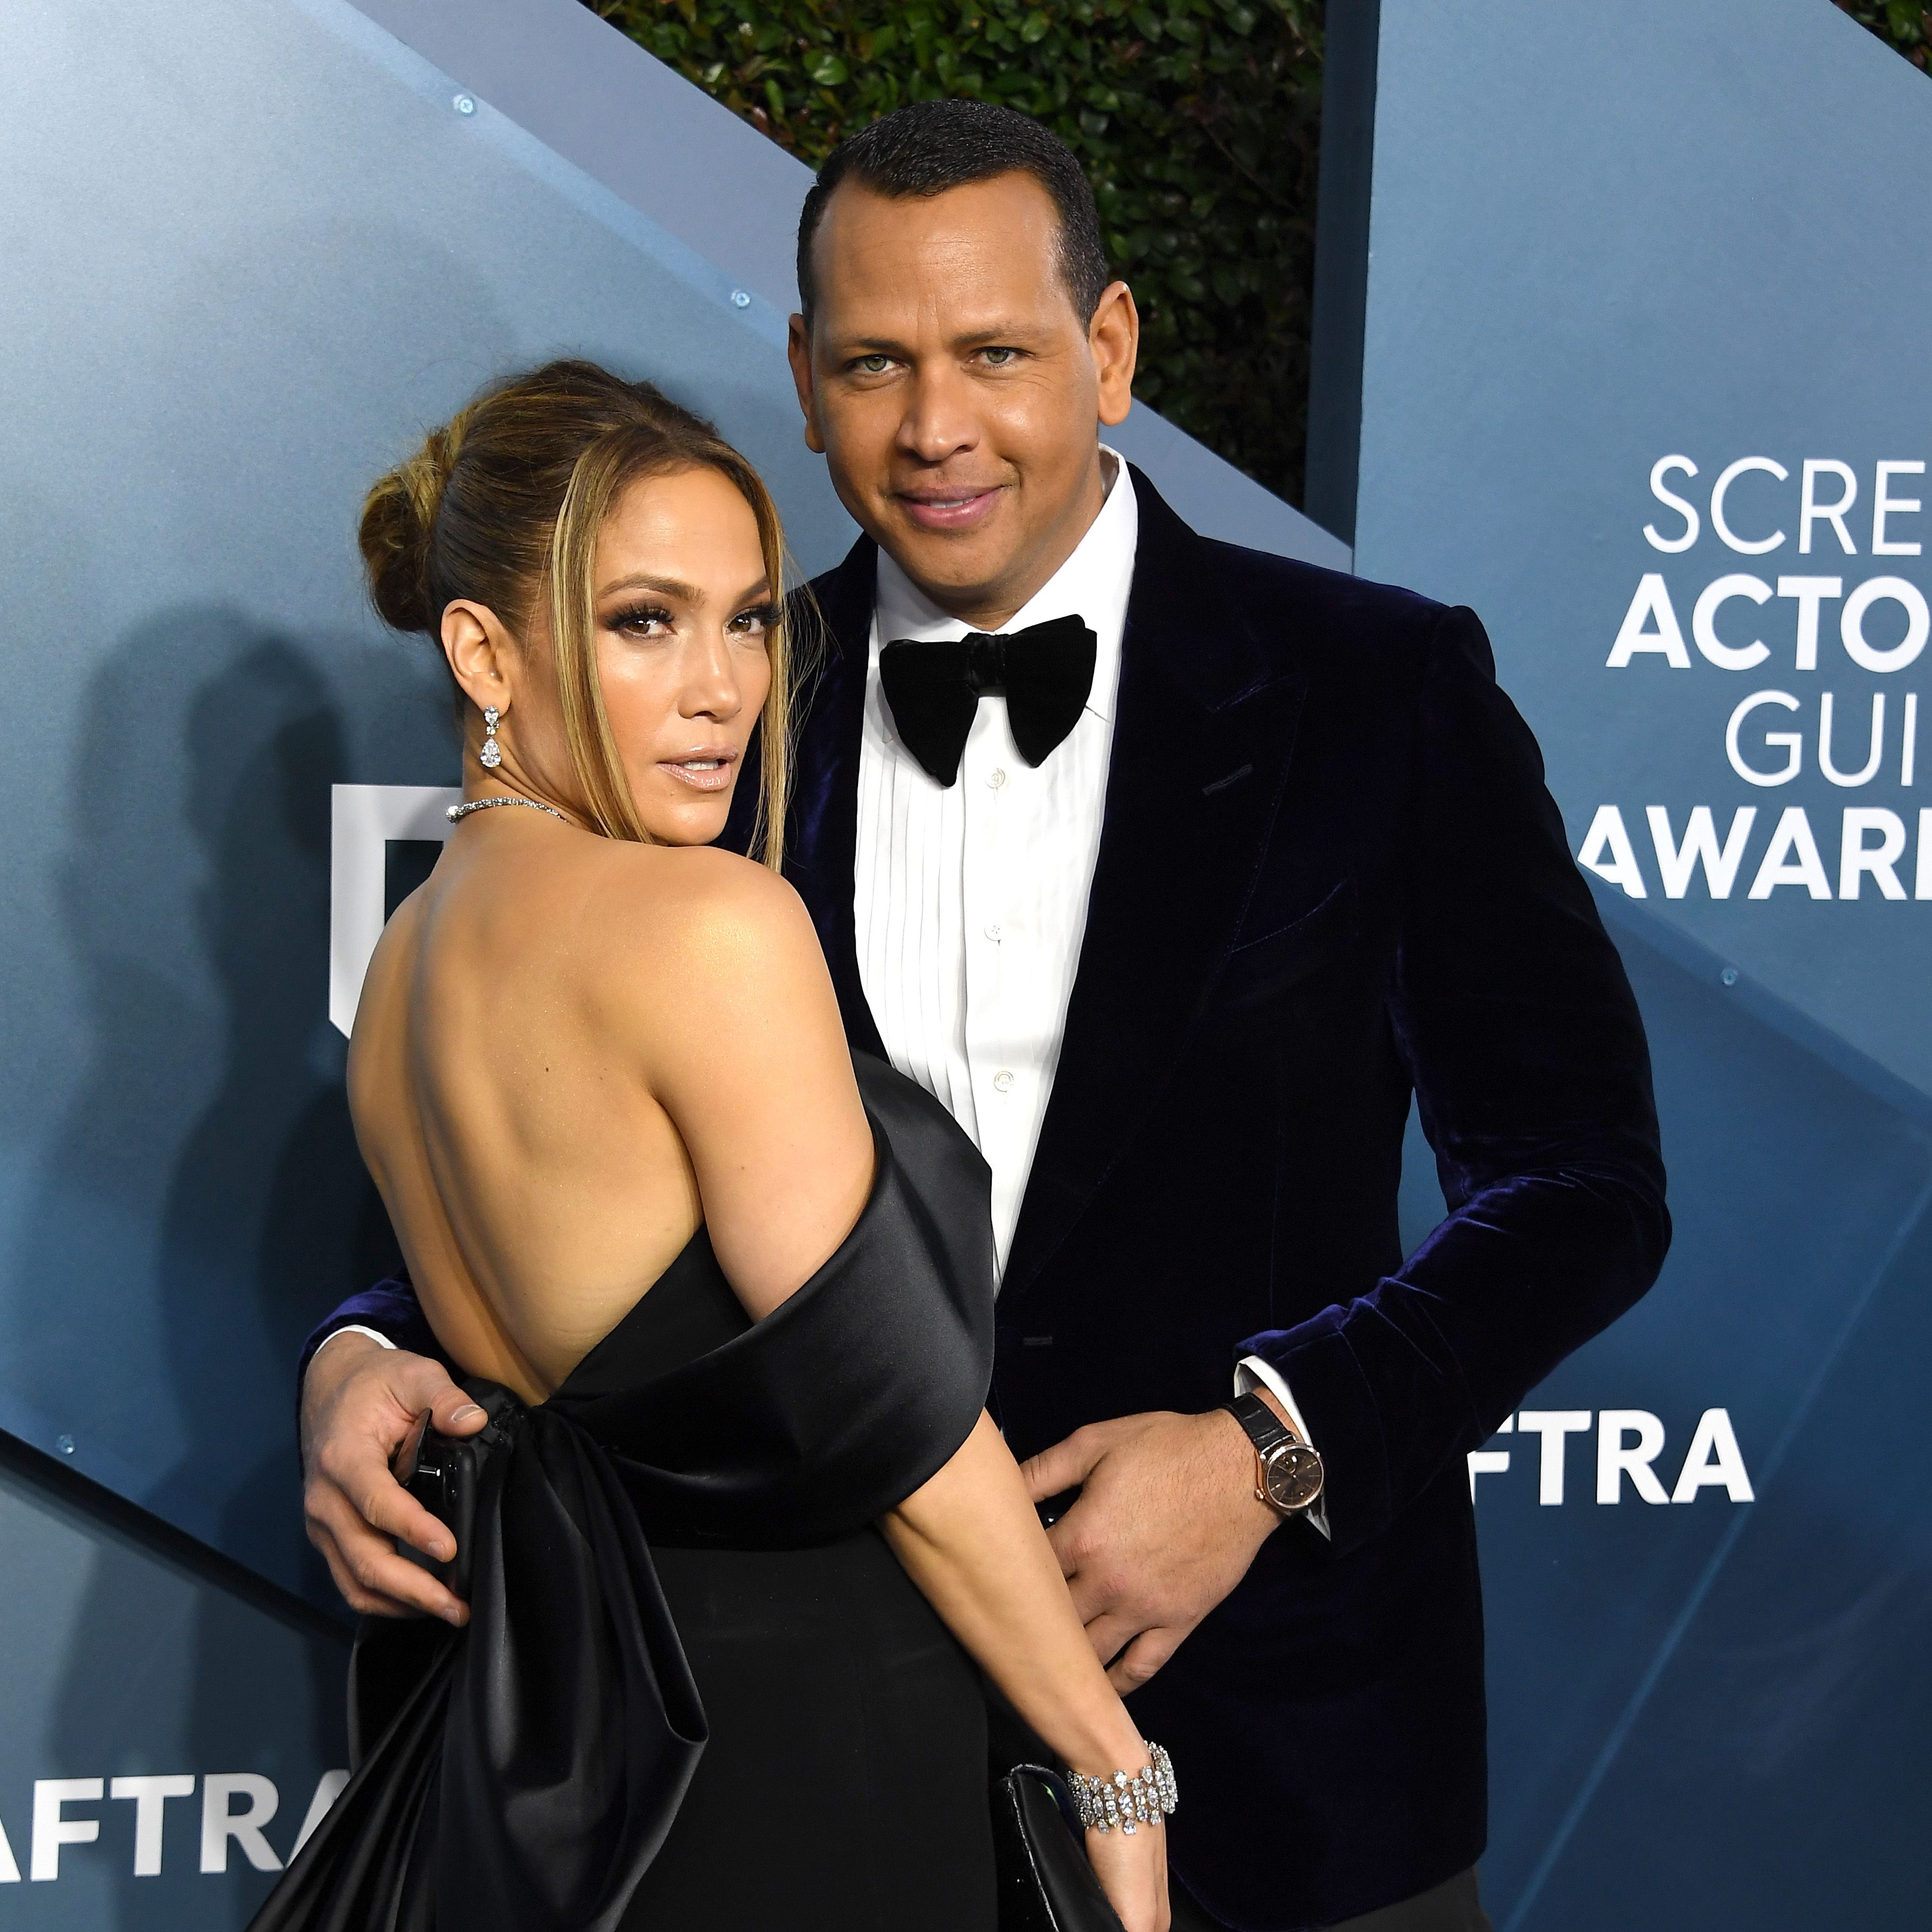 Alex Rodriguez, Drake, Ben Affleck and all known Jennifer Lopez exes ranked by relationships duration